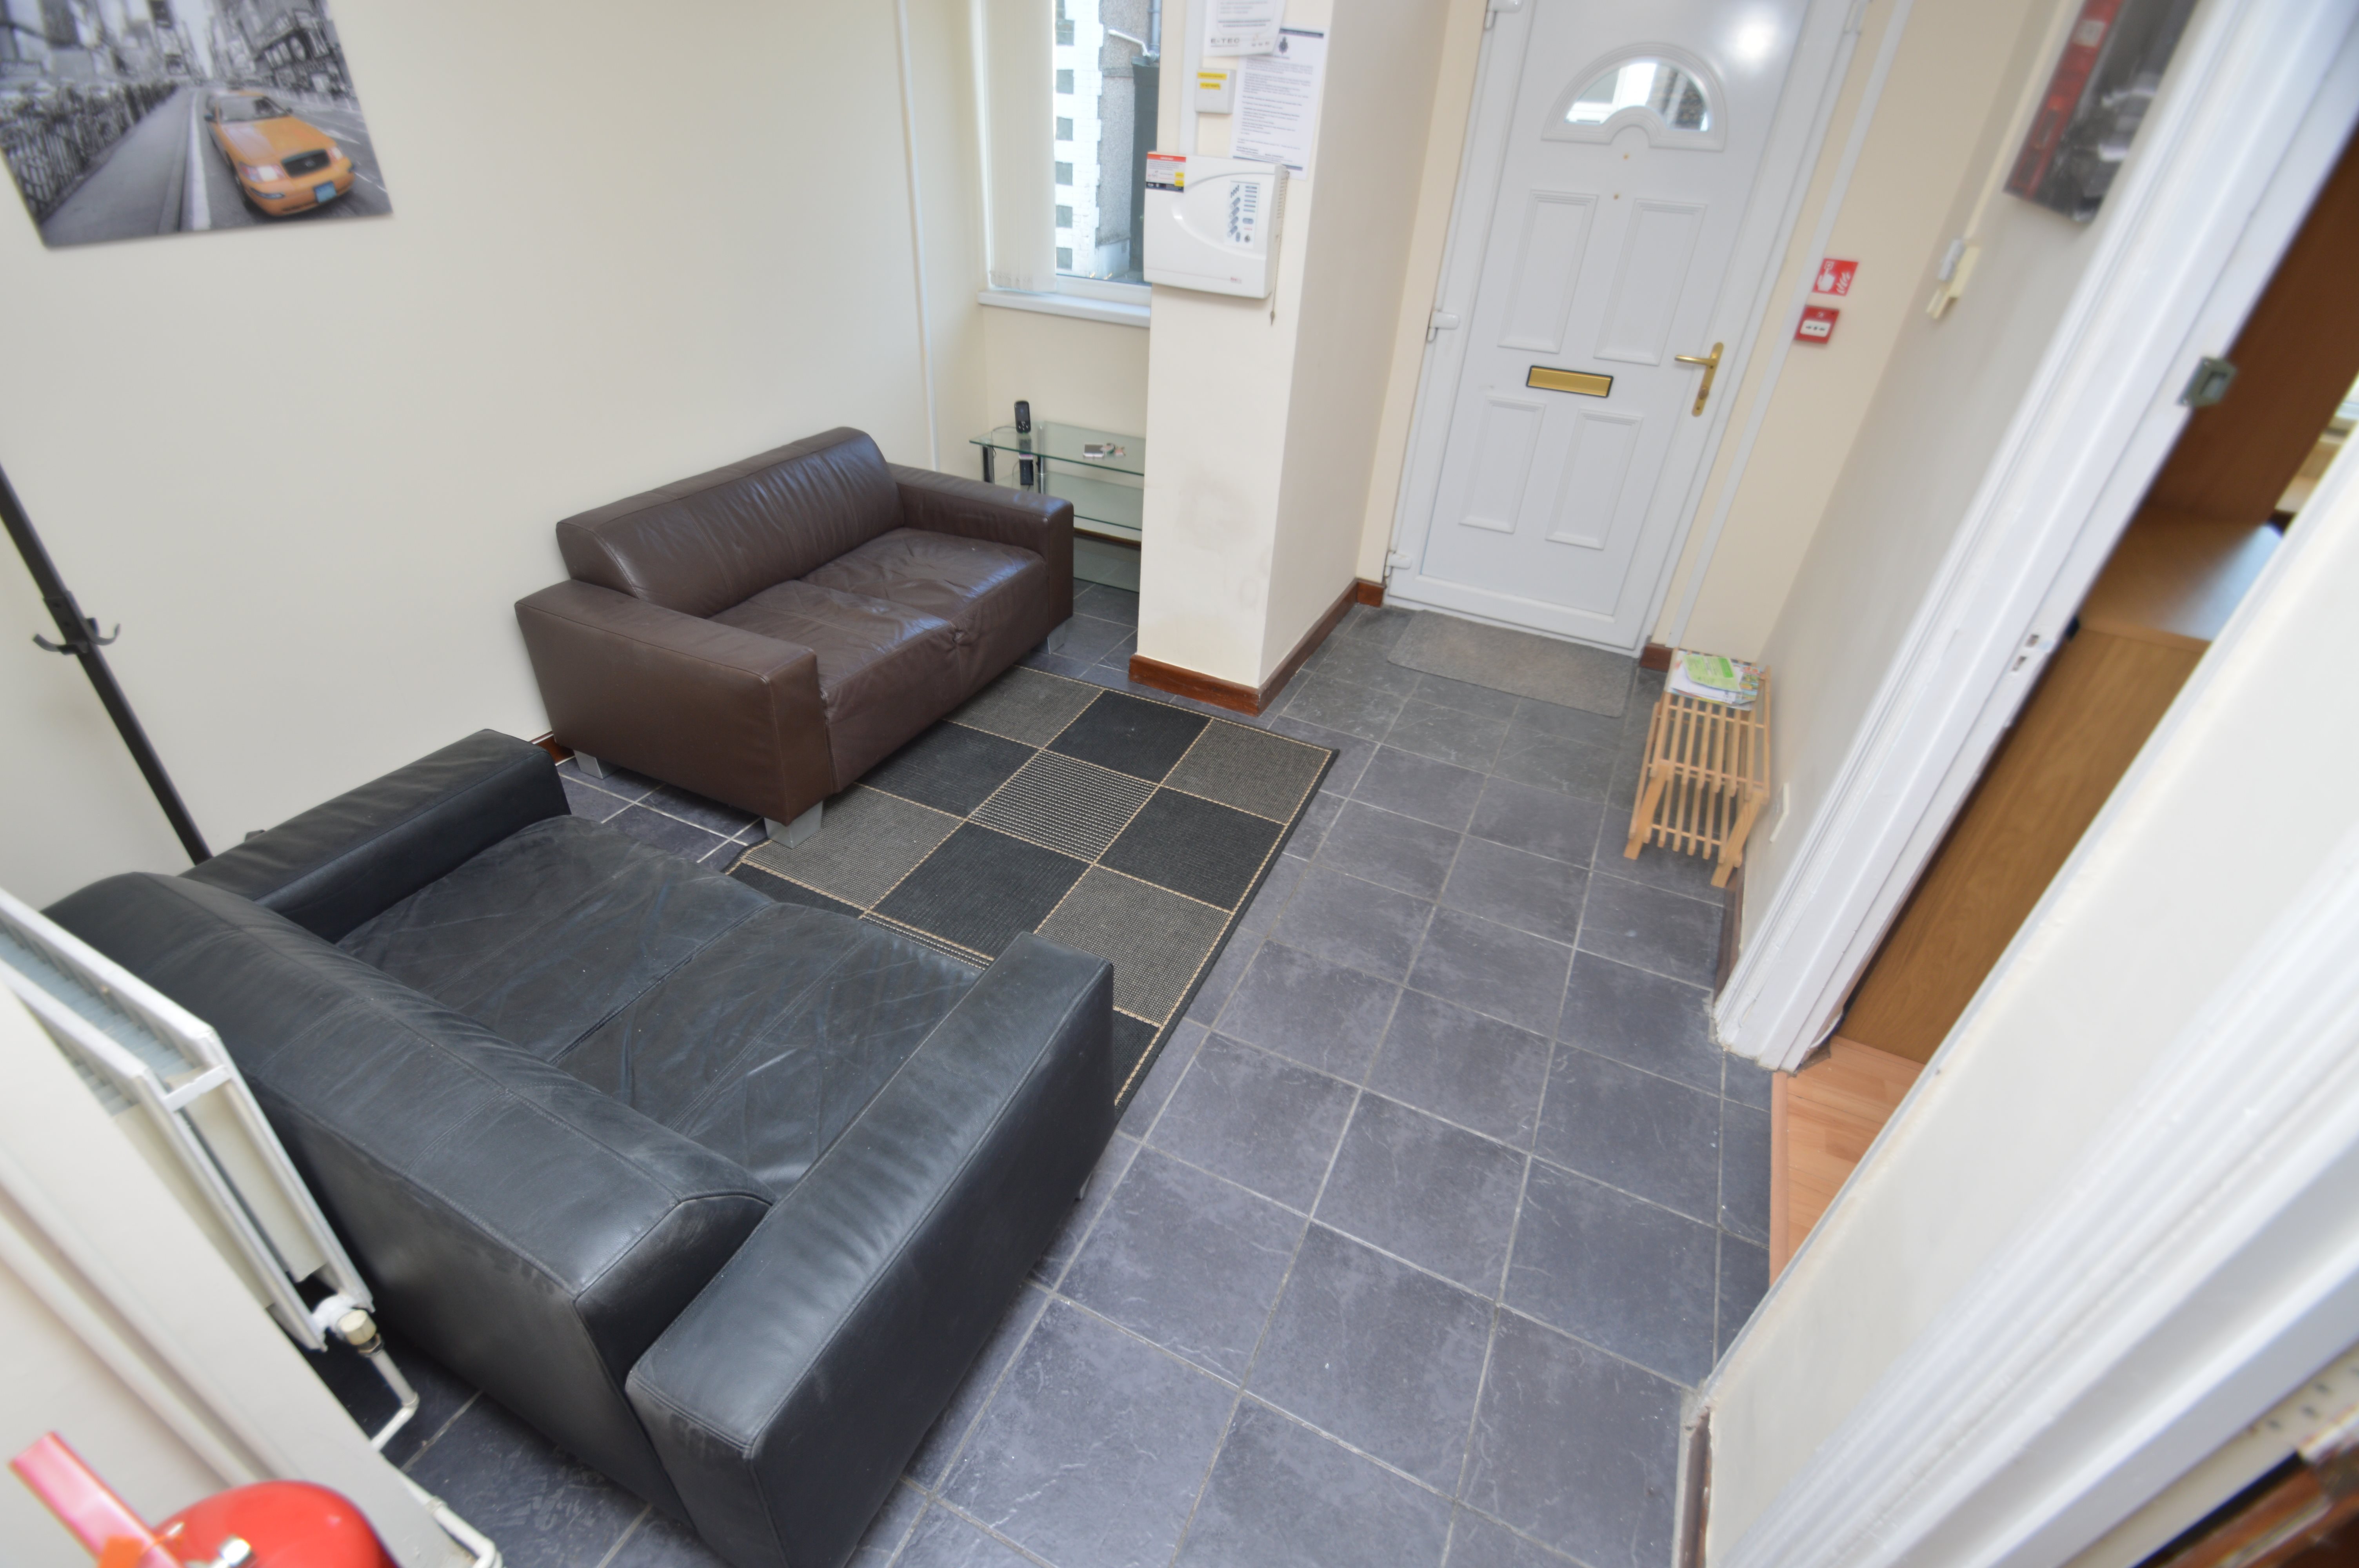 1 bed house / flat share to rent in Wood Road, Treforest  - Property Image 7